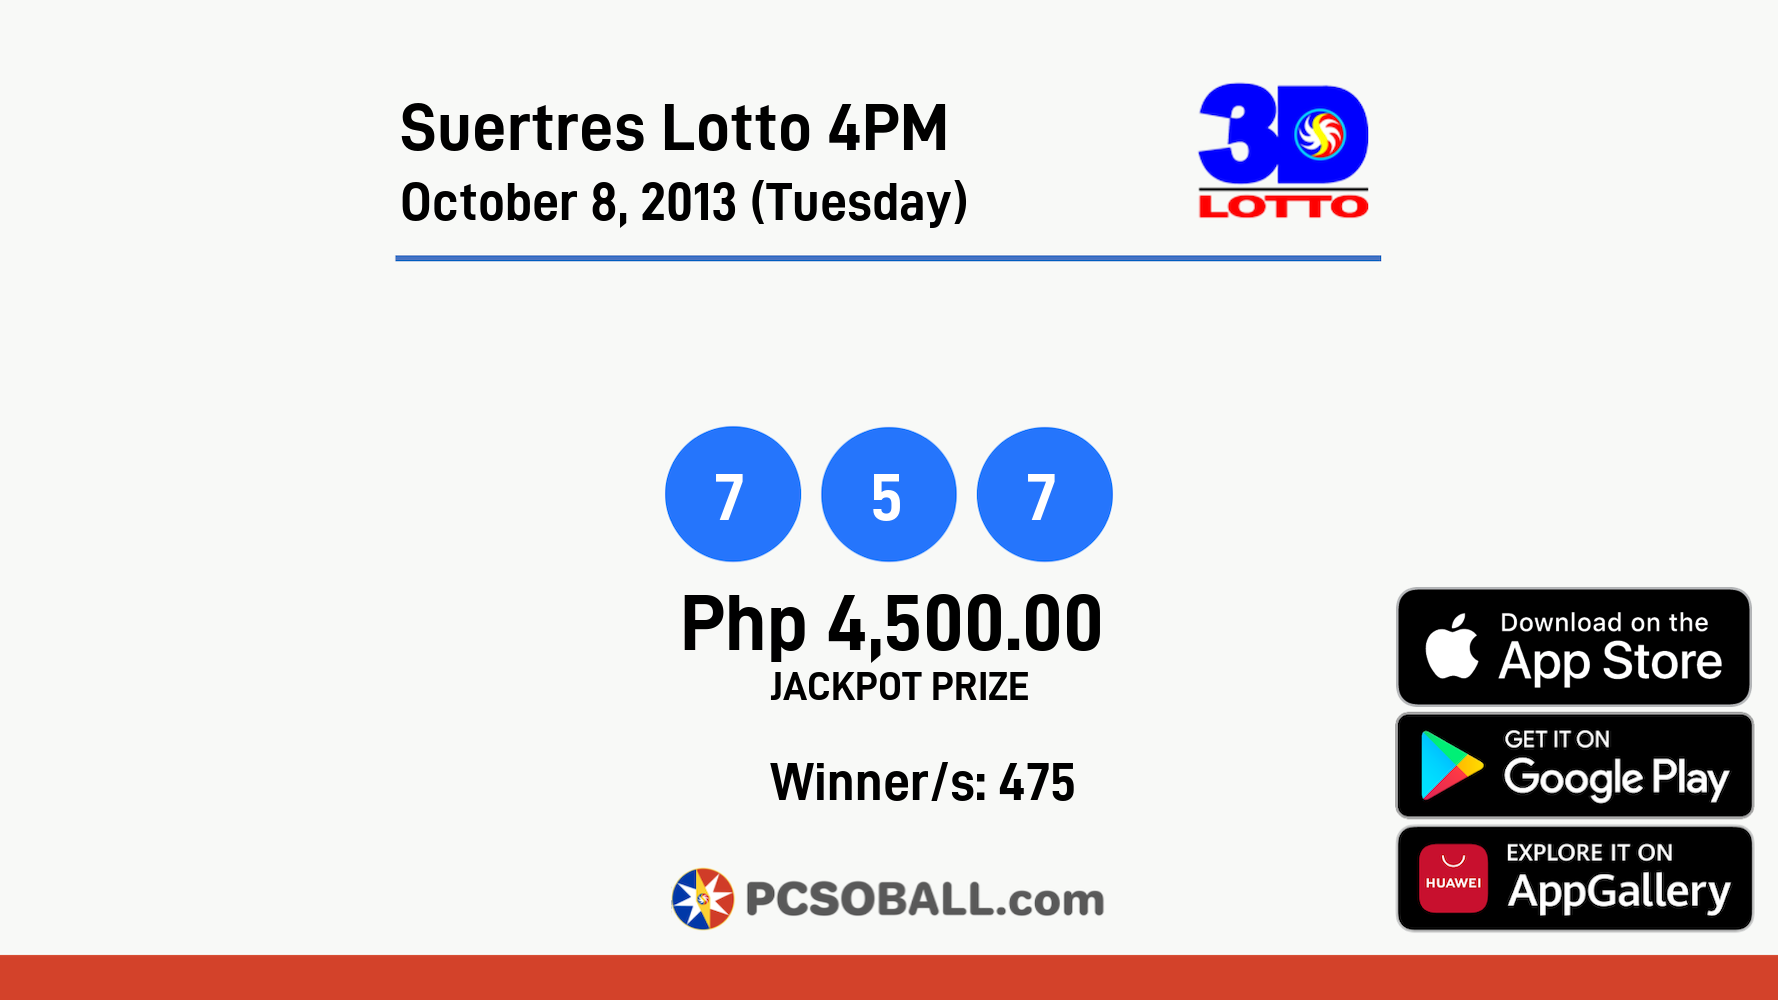 Suertres Lotto 4PM October 8, 2013 (Tuesday) Result